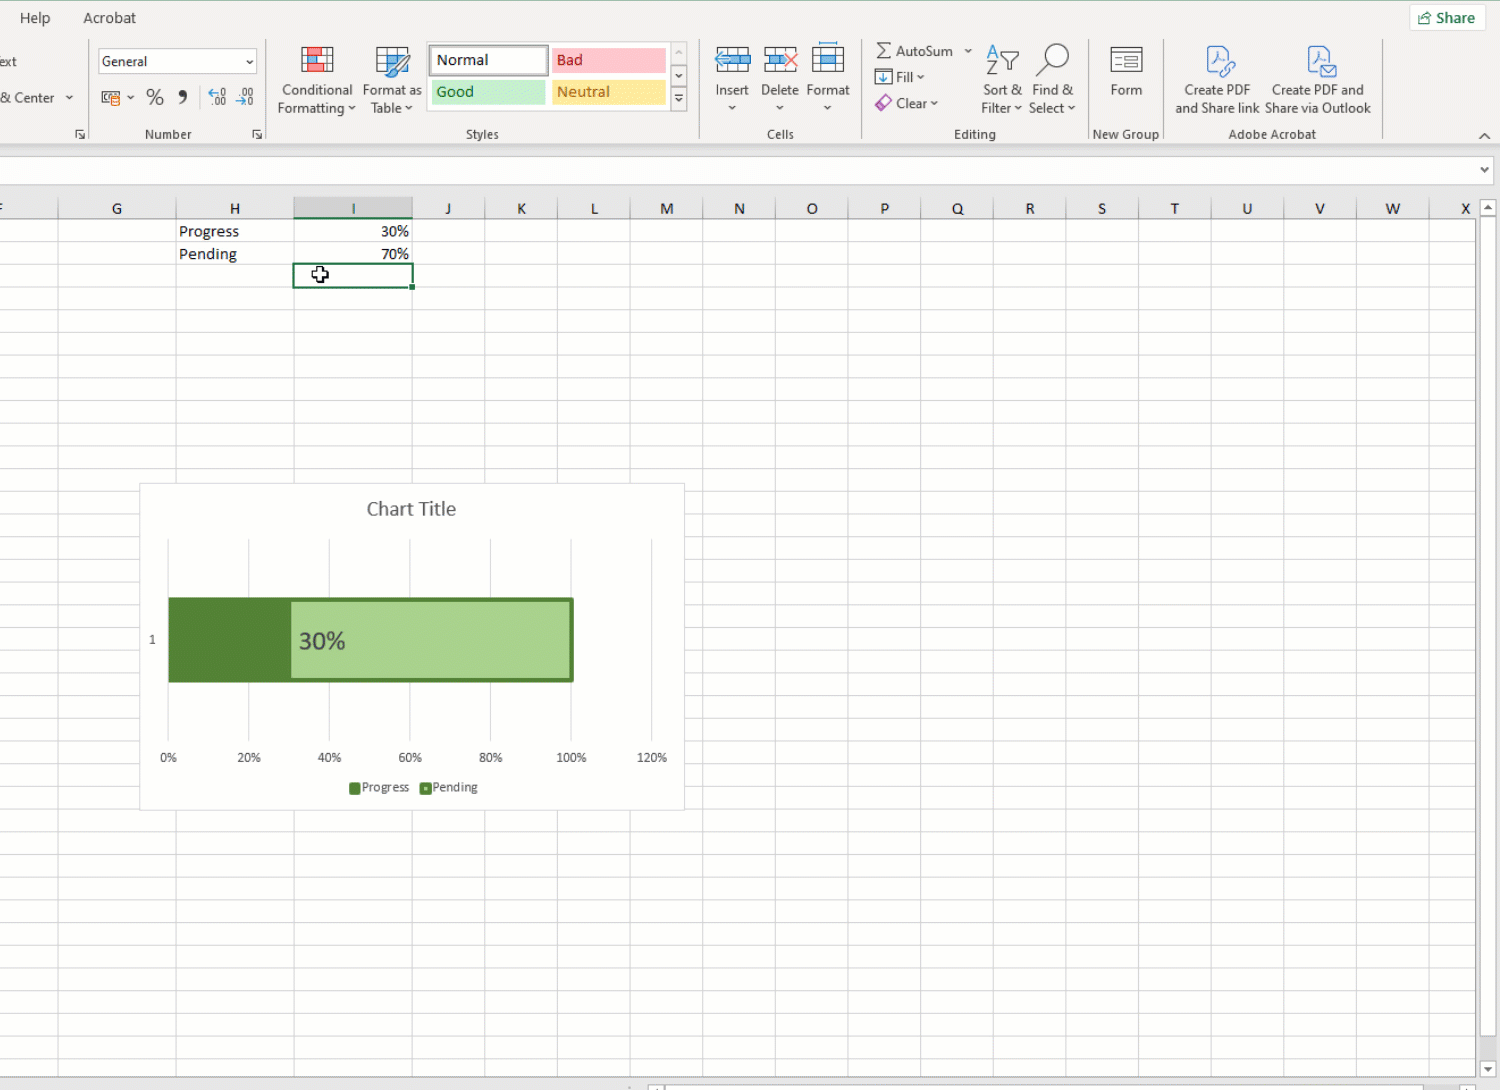 Formatting the chart area